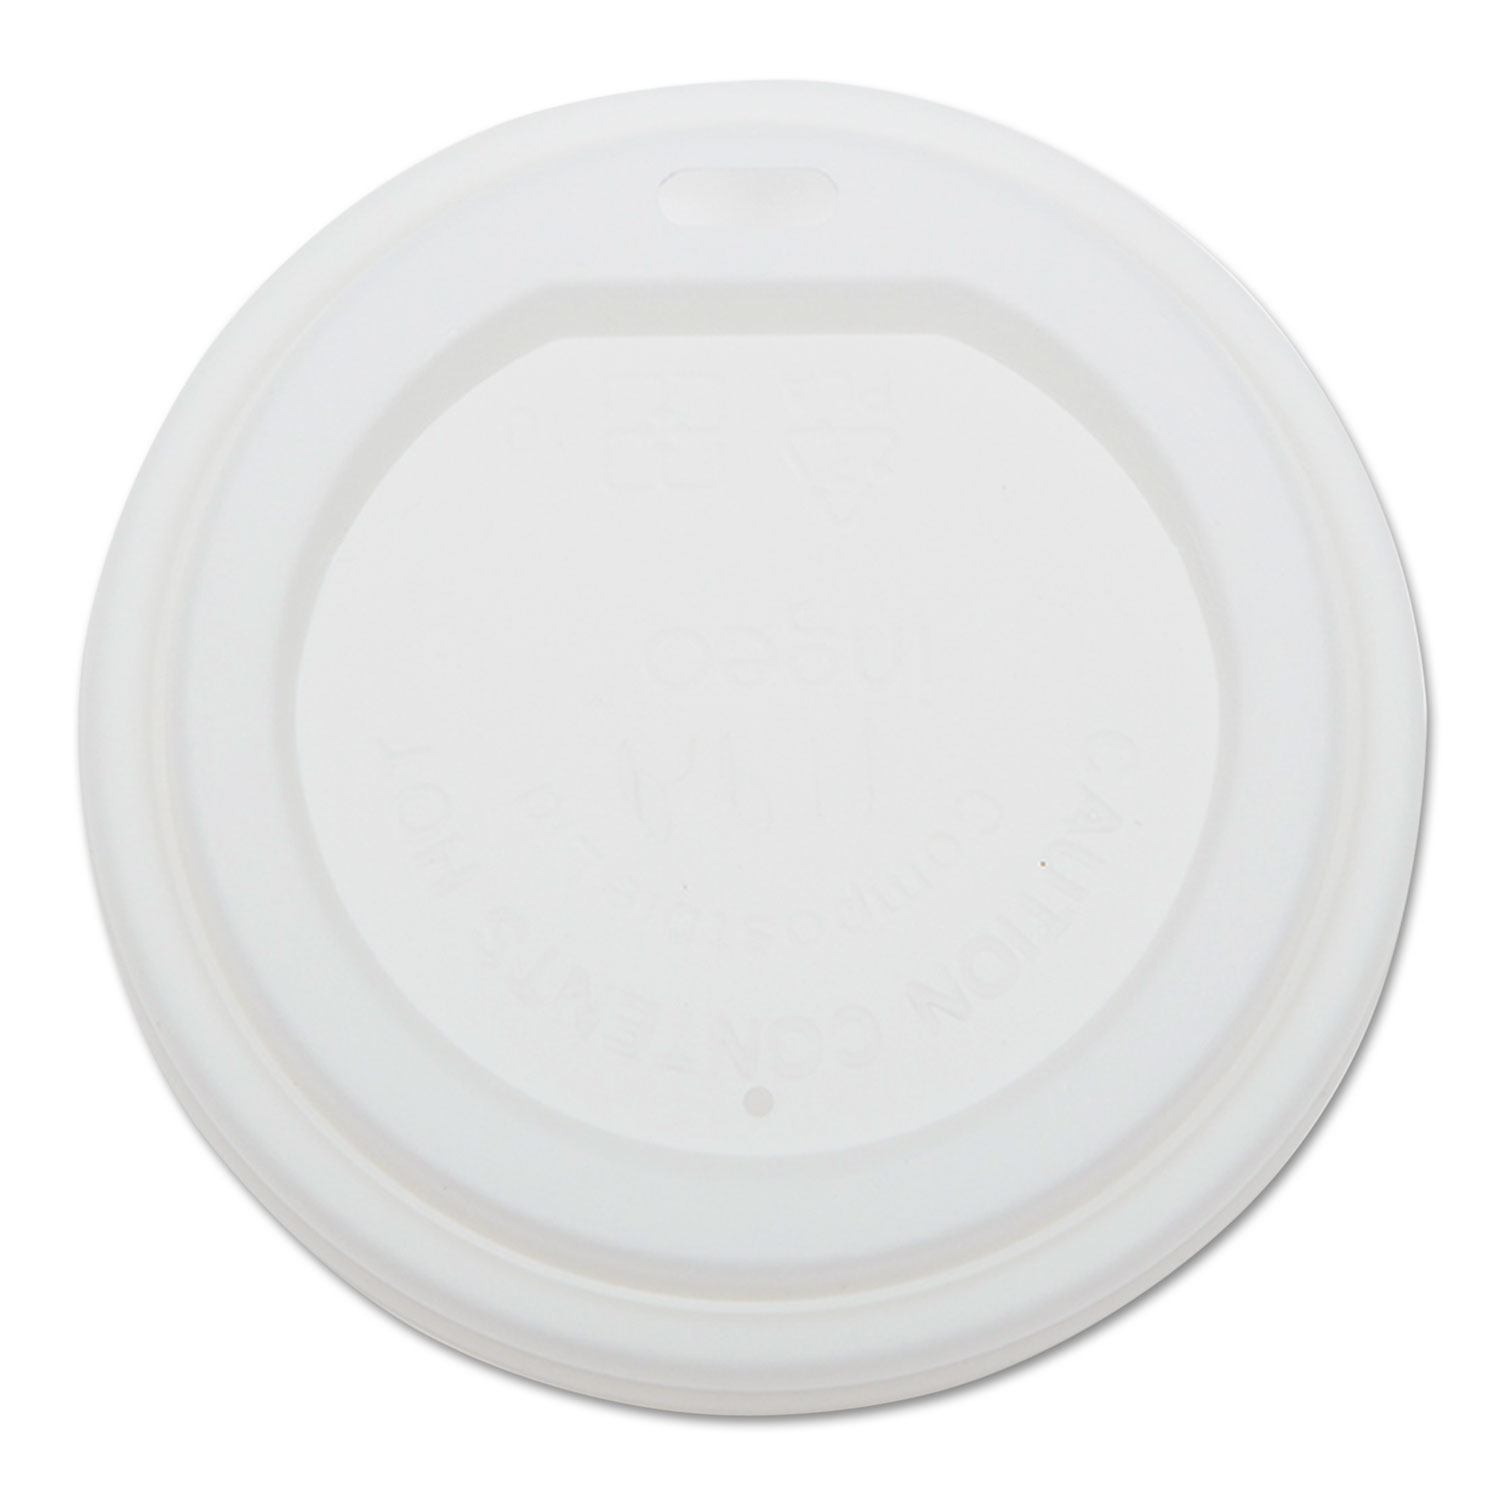 Cup Lids for 10-20oz Hot Cups, 1000/Carton